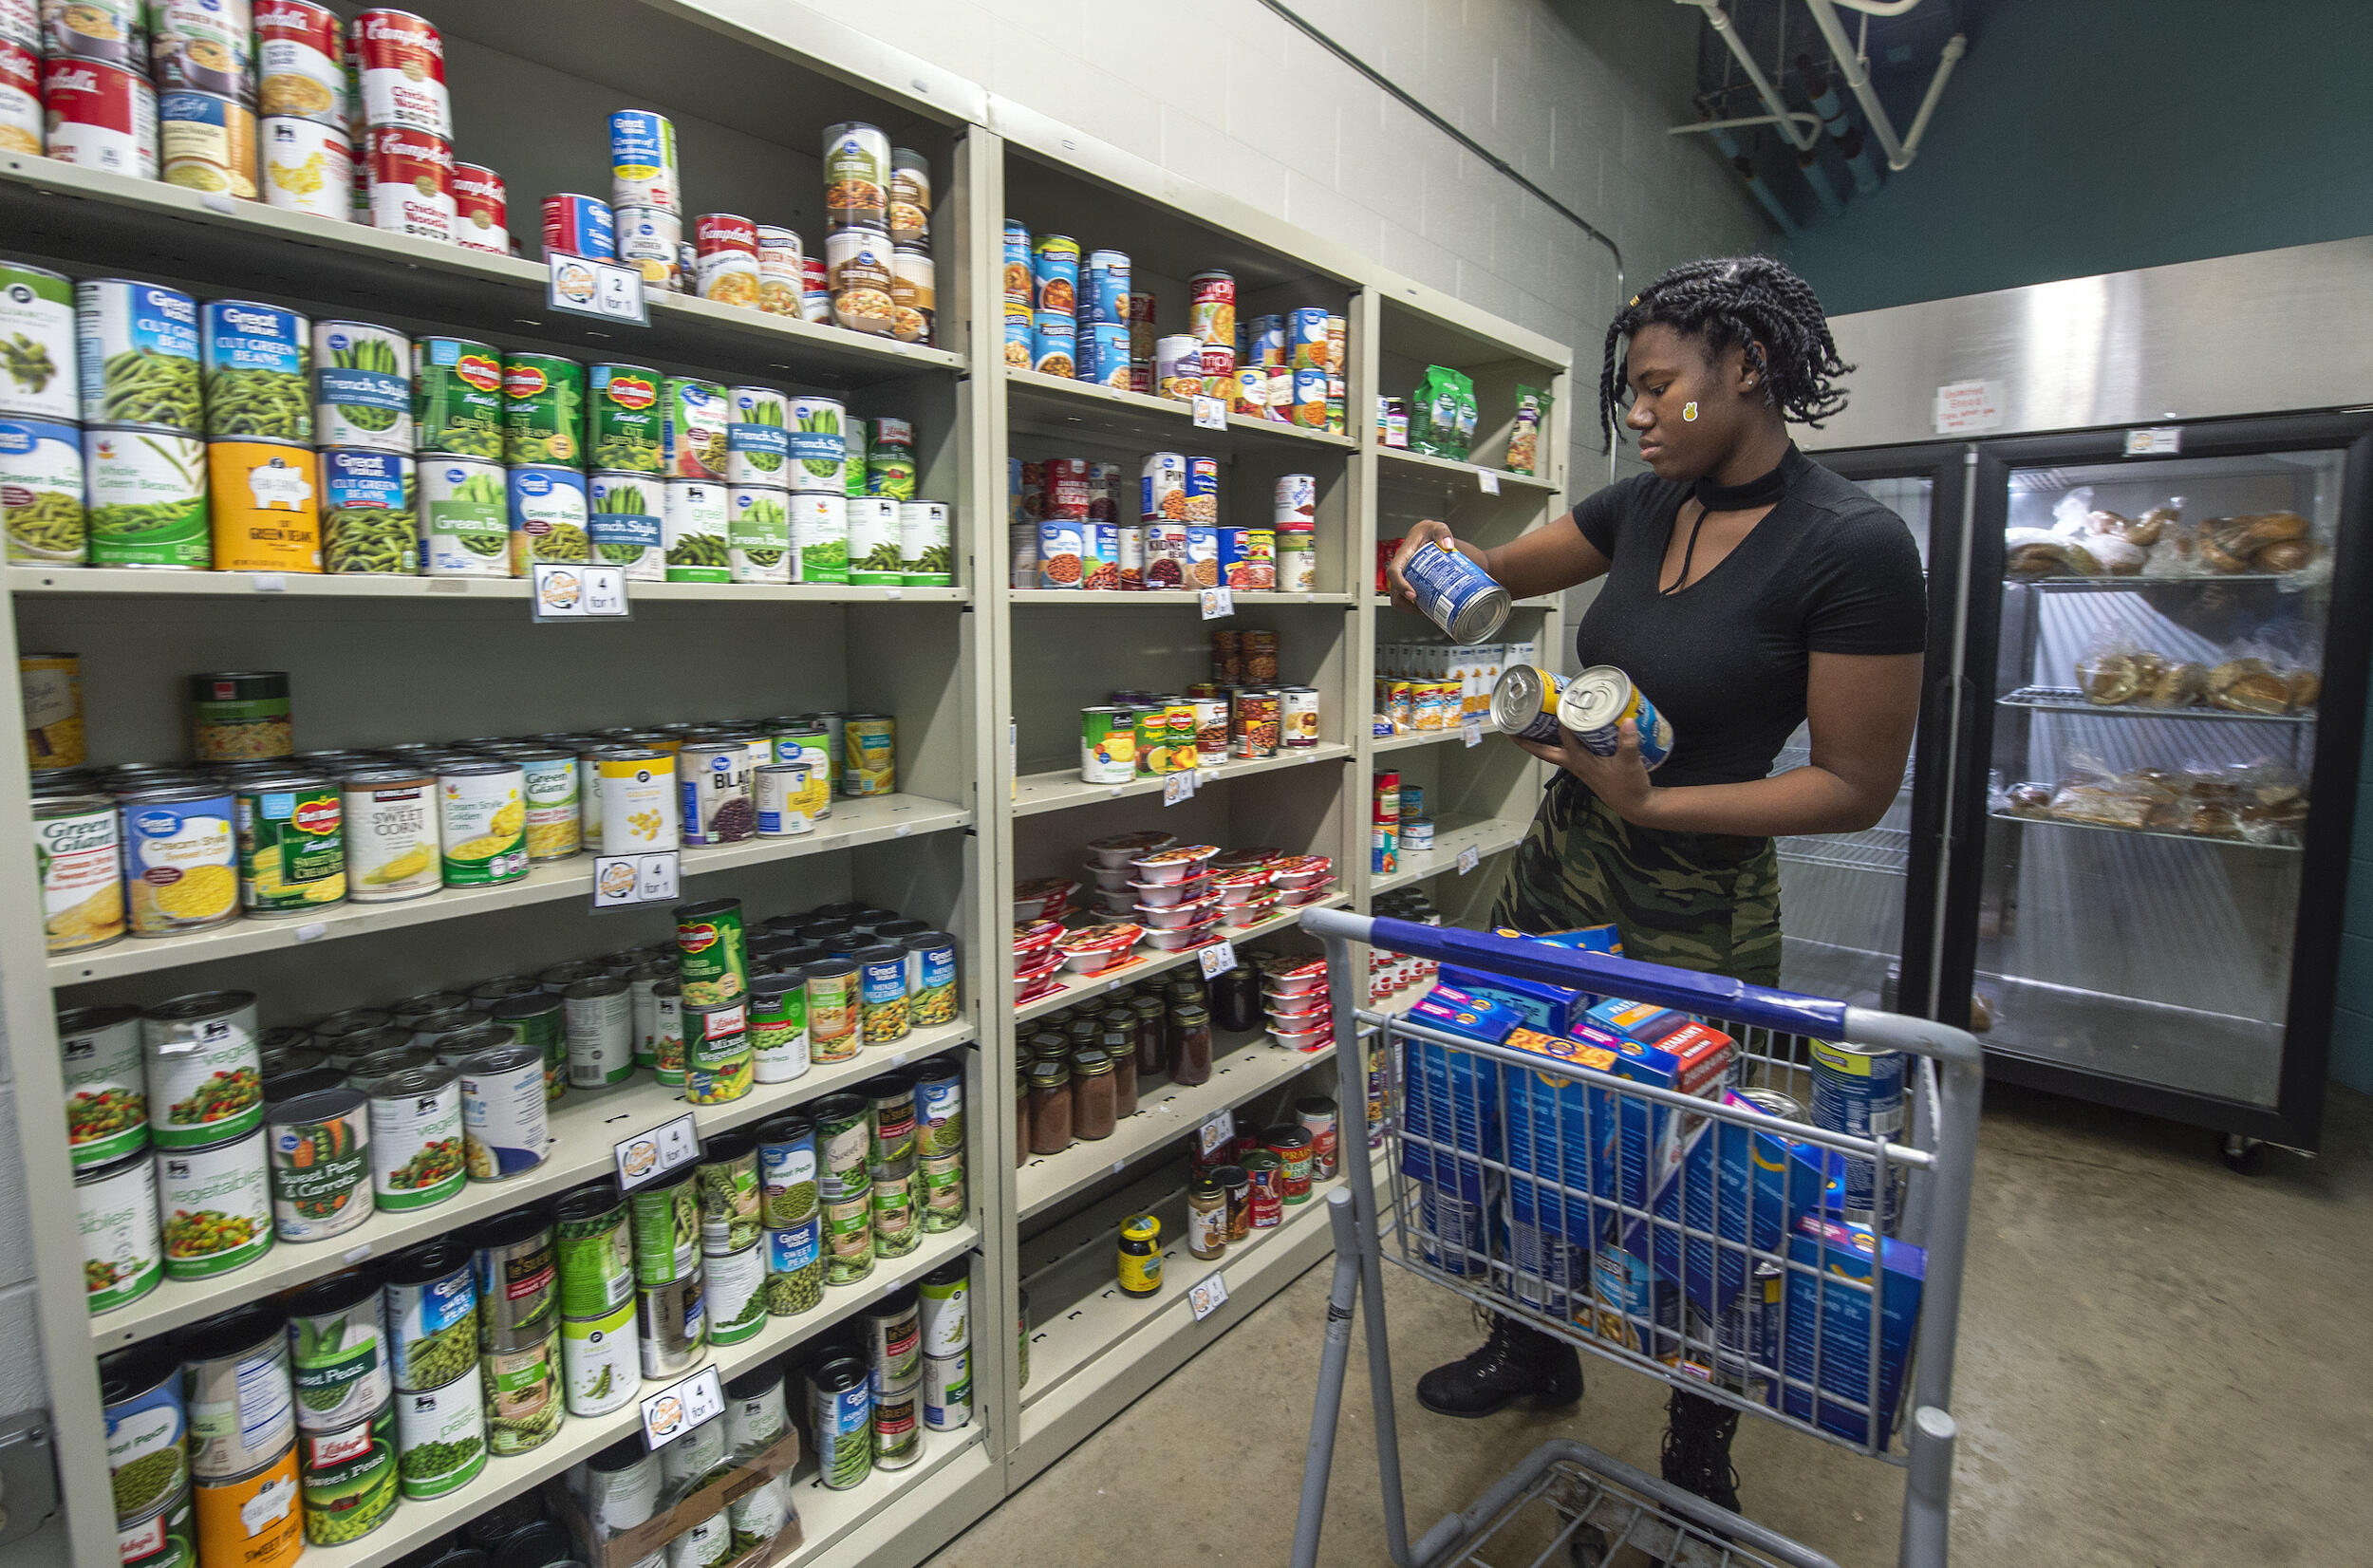 A person reads a can of soup. Donated food items sit on shelves in the background.